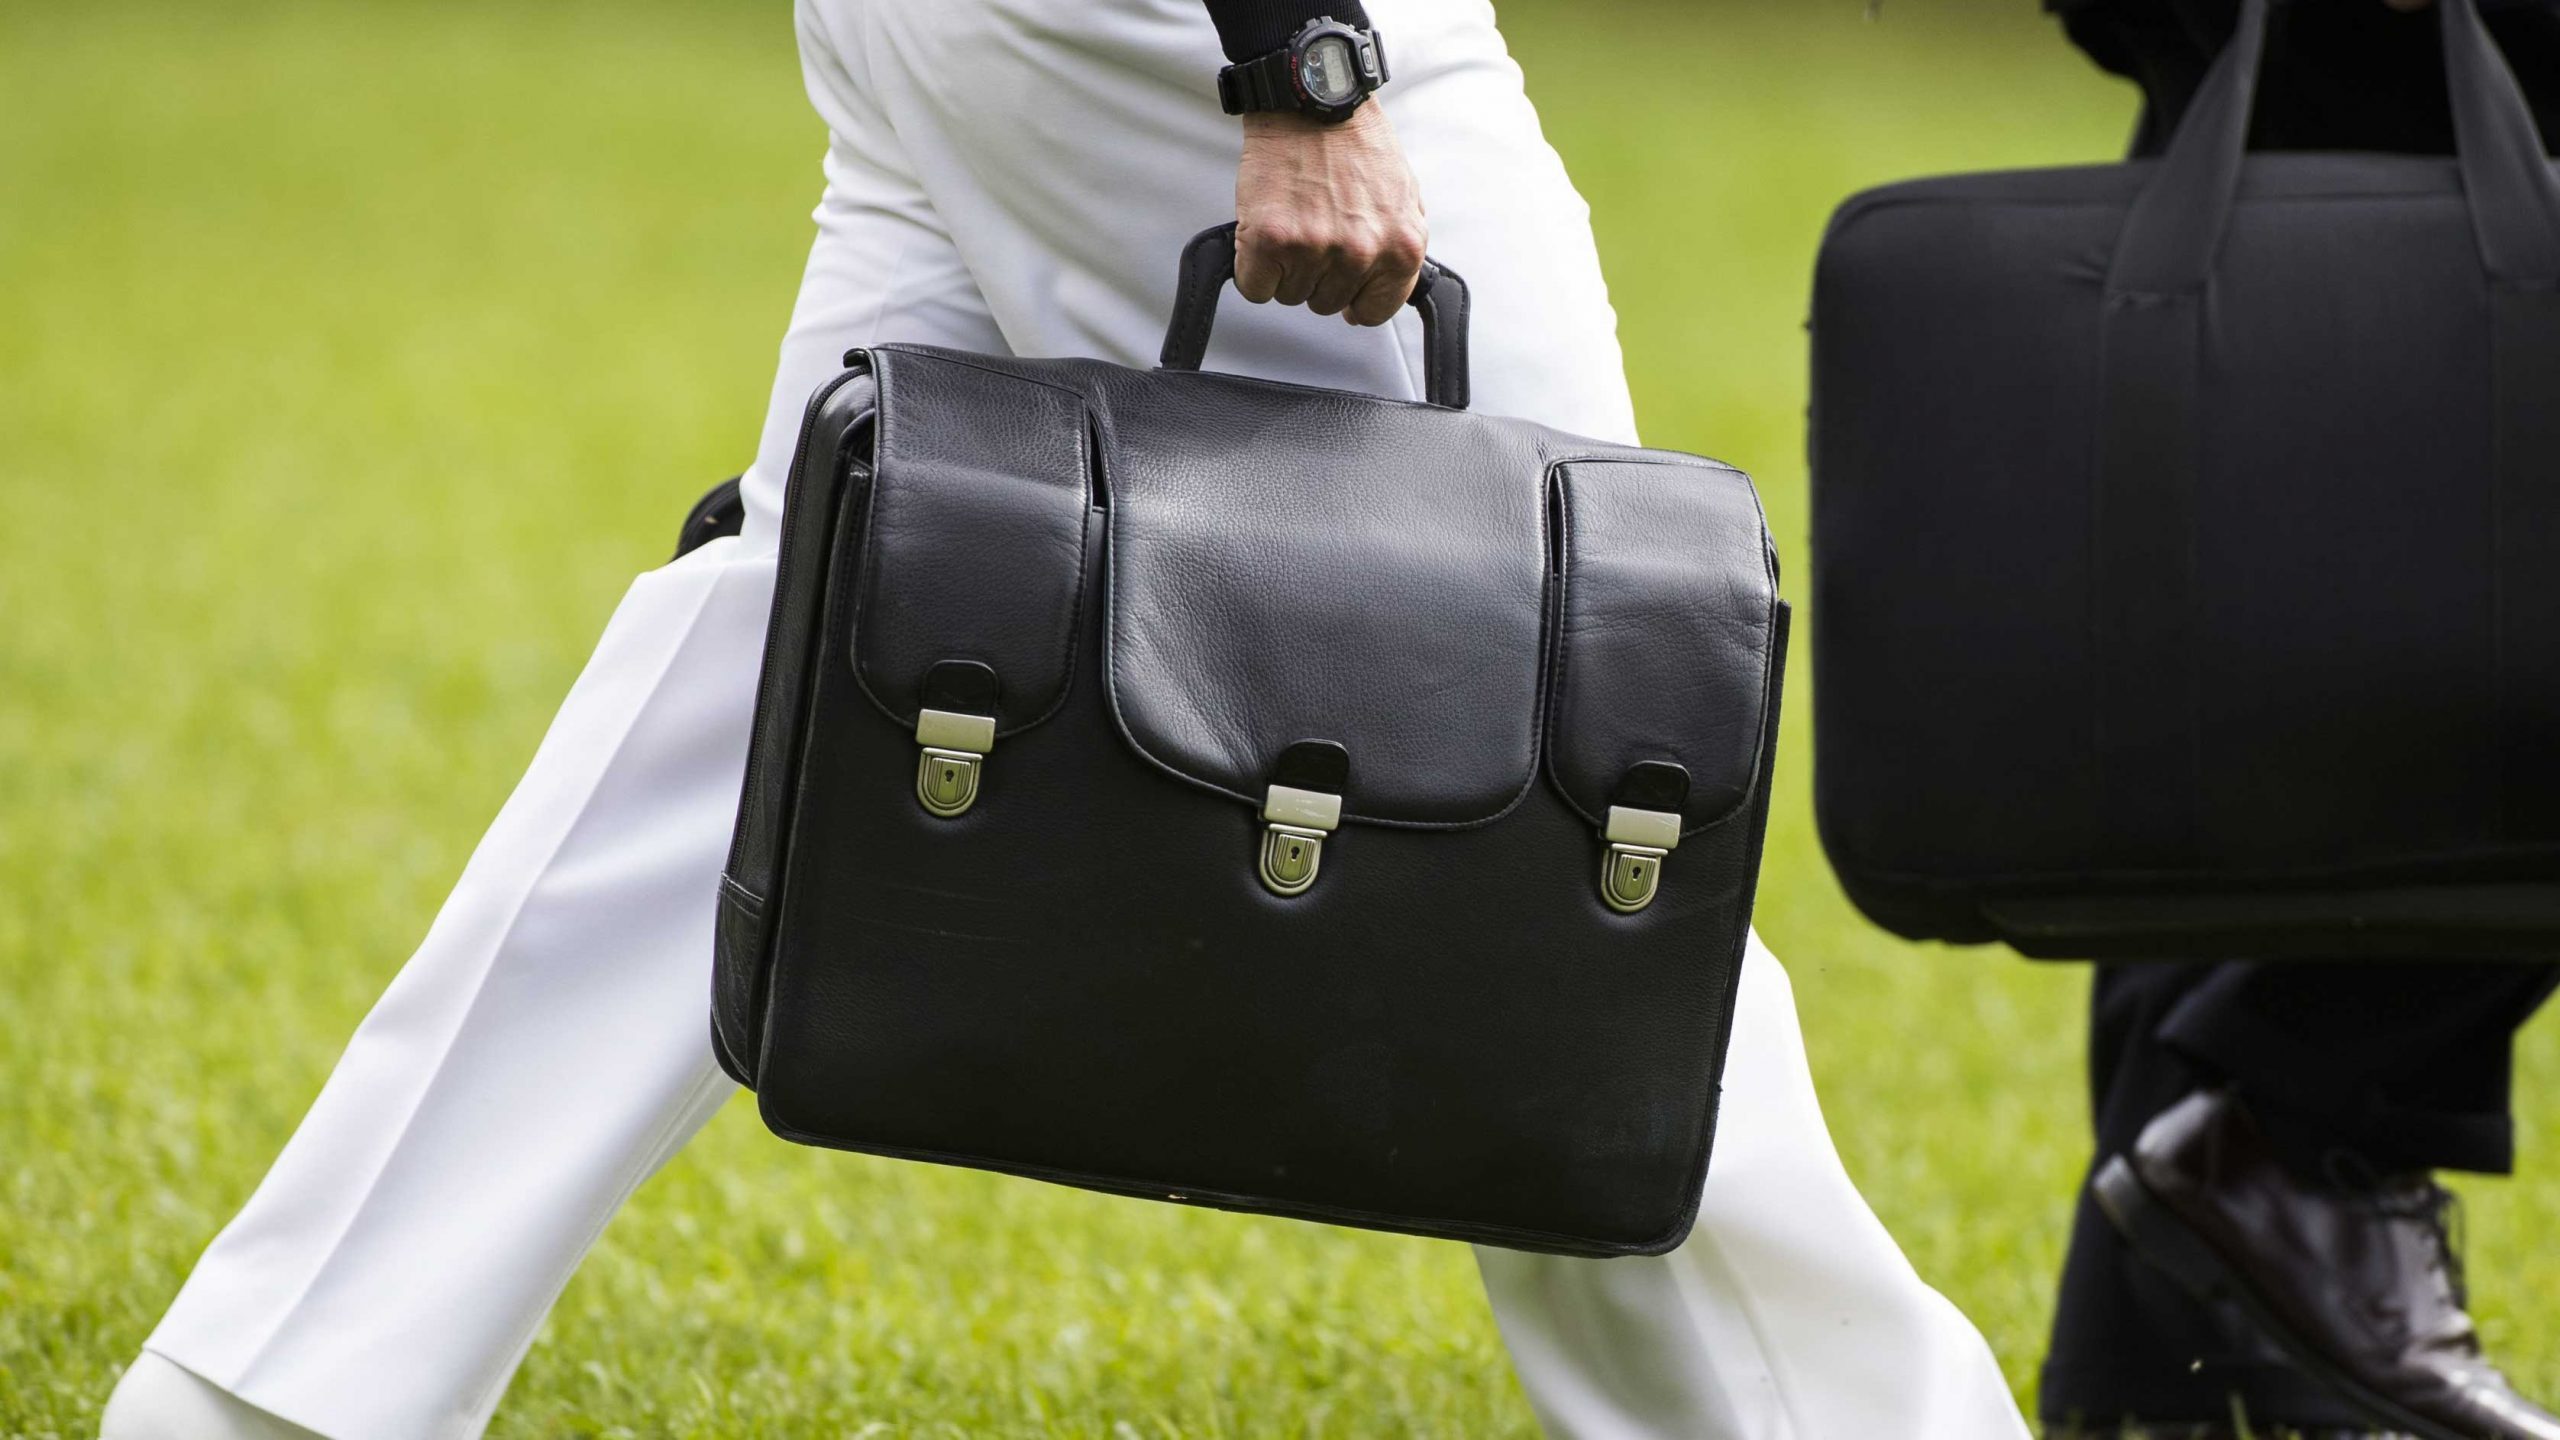 You always hear about the 'nuclear football.' Here's the behind